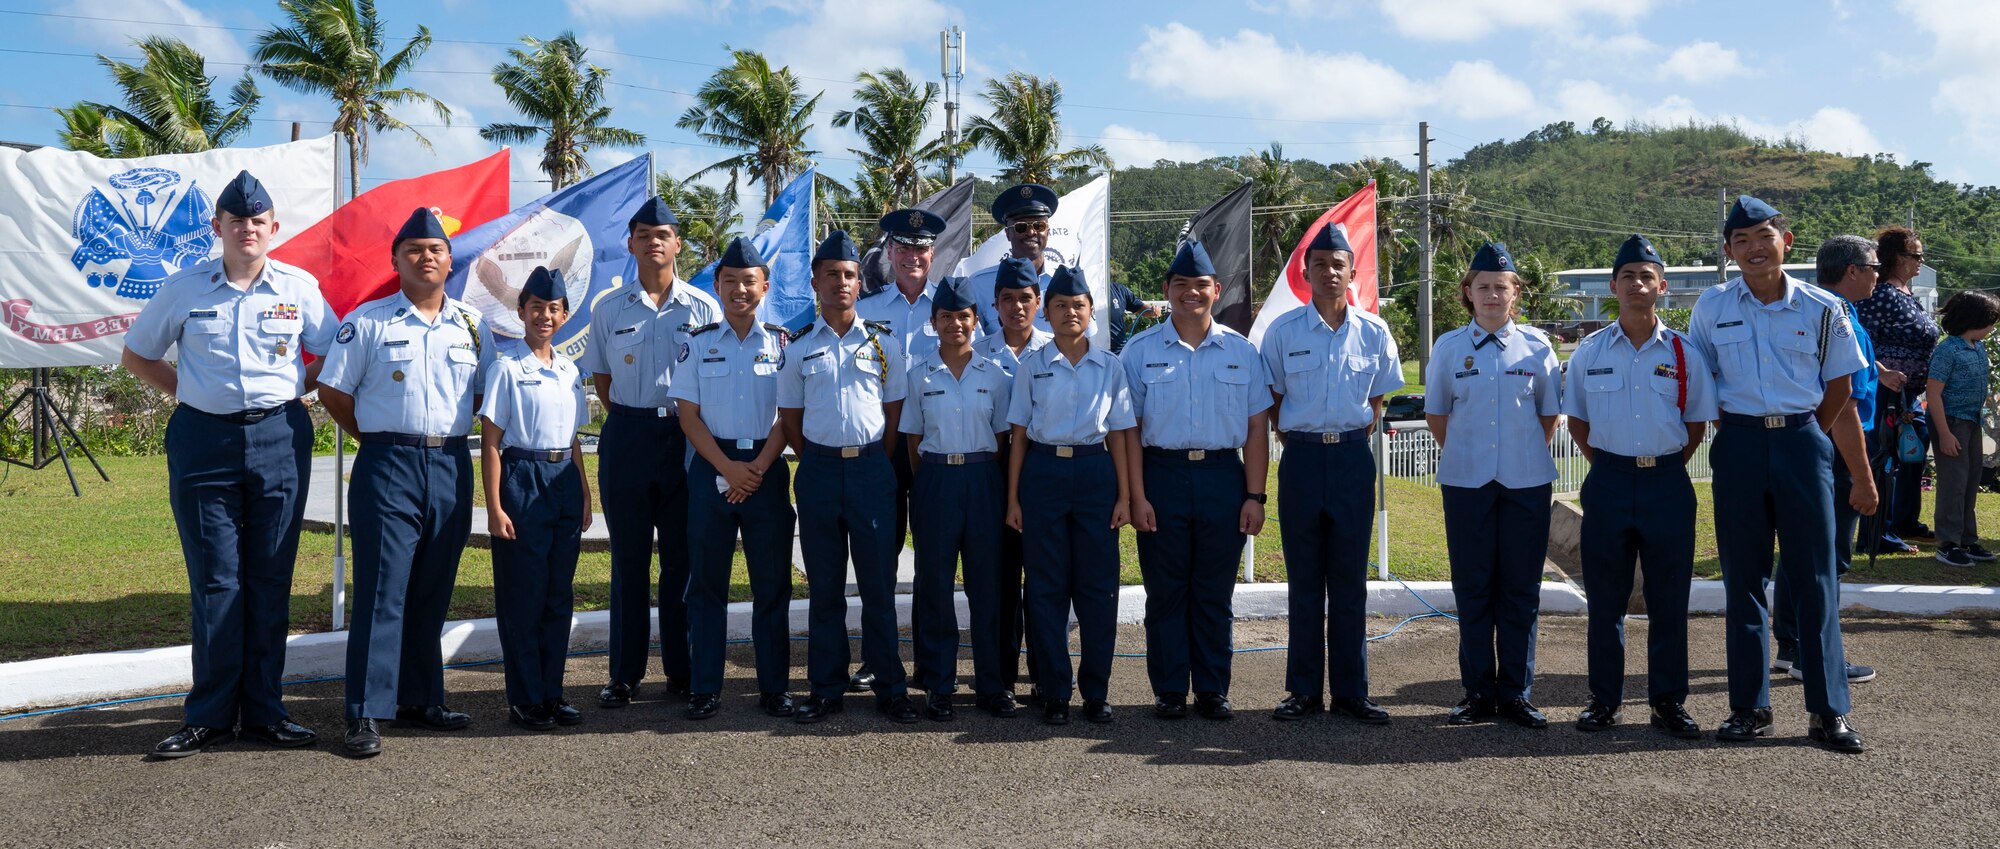 U.S. Air Force members and junior reserve officer training corps members pose for a photo after the Wreaths Across America ceremony at the Guam Veterans Cemetery, Guam, Dec. 16, 2023. The Wreaths Across America program allows families to honor and remember the sacrifices of our military Veterans by placing wreaths on their graves during the holiday season. (U.S. Air Force photo by Airman 1st Class Spencer Perkins)